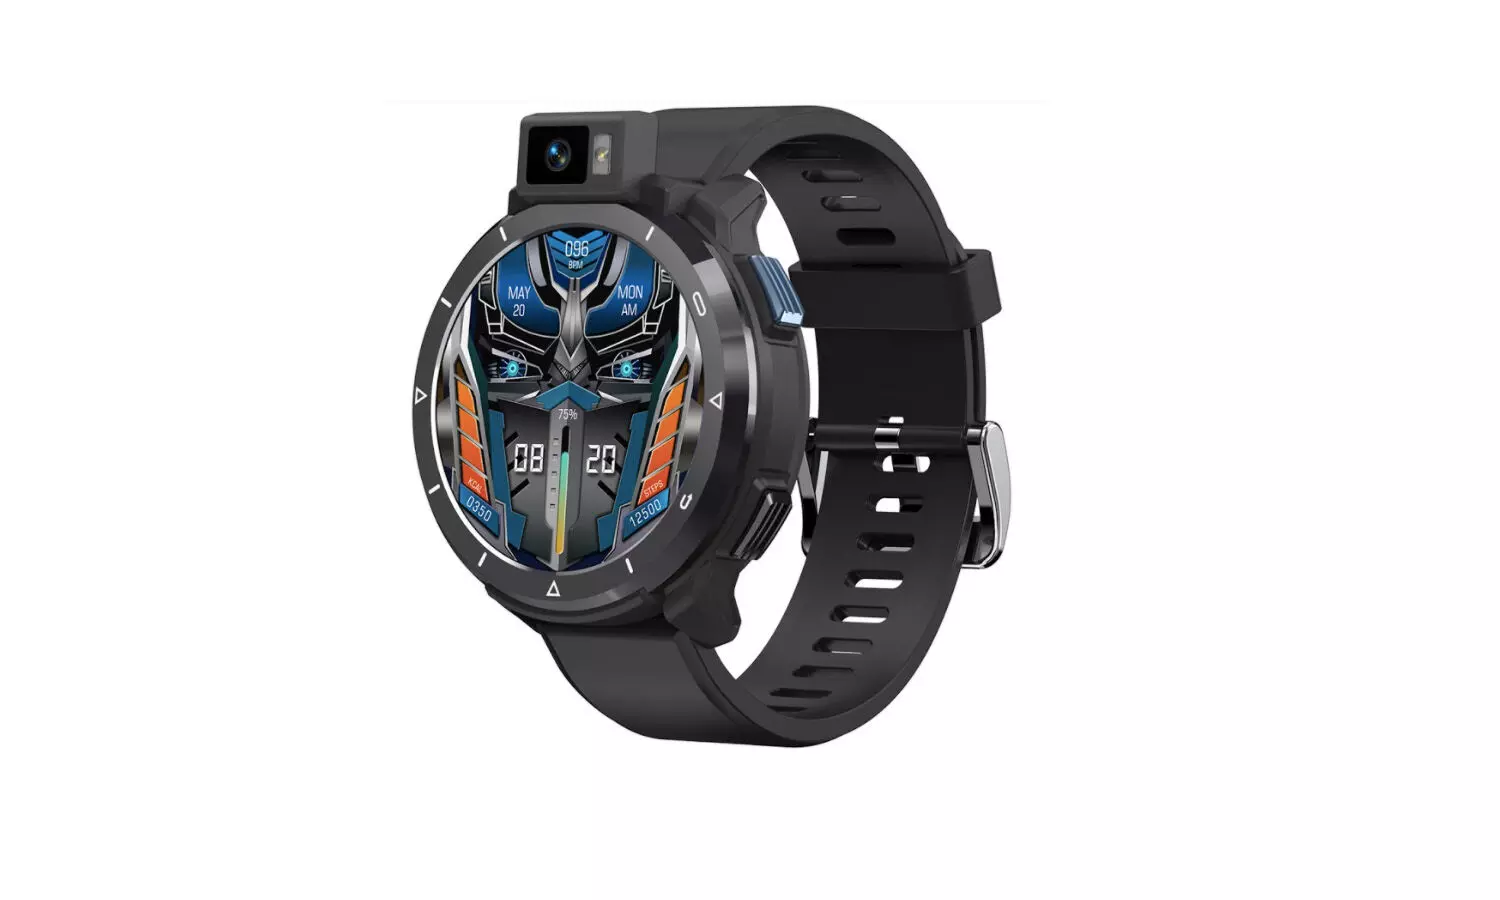 OPTIMUS 2: Worlds first smartwatch with 13 megapixel camera launched